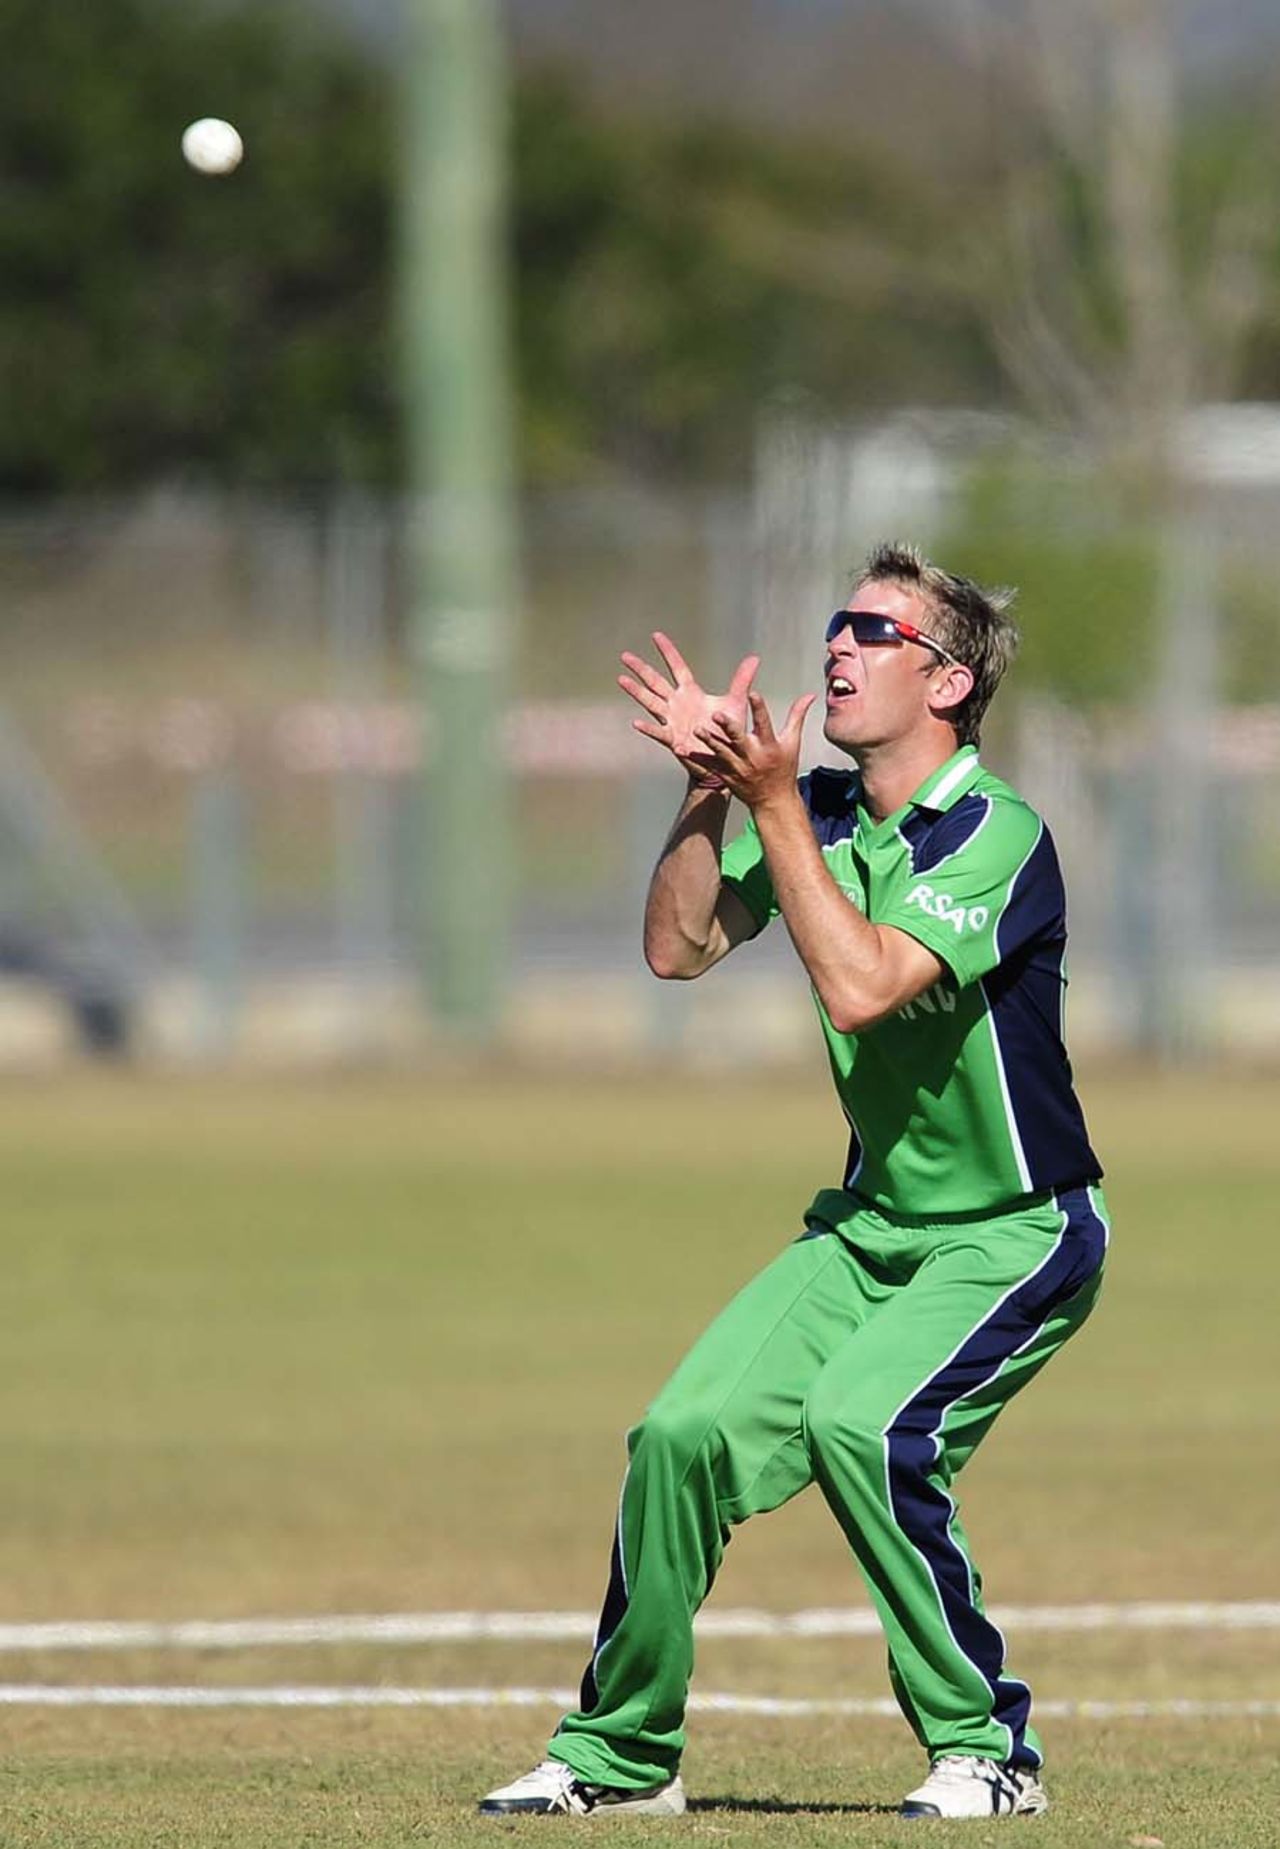 Graeme McCarter gets underneath the ball to take a catch and dismiss Prithu Baskota, Ireland v Nepal, ICC Under-19 World Cup, Group A, Townsville, August 15, 2012